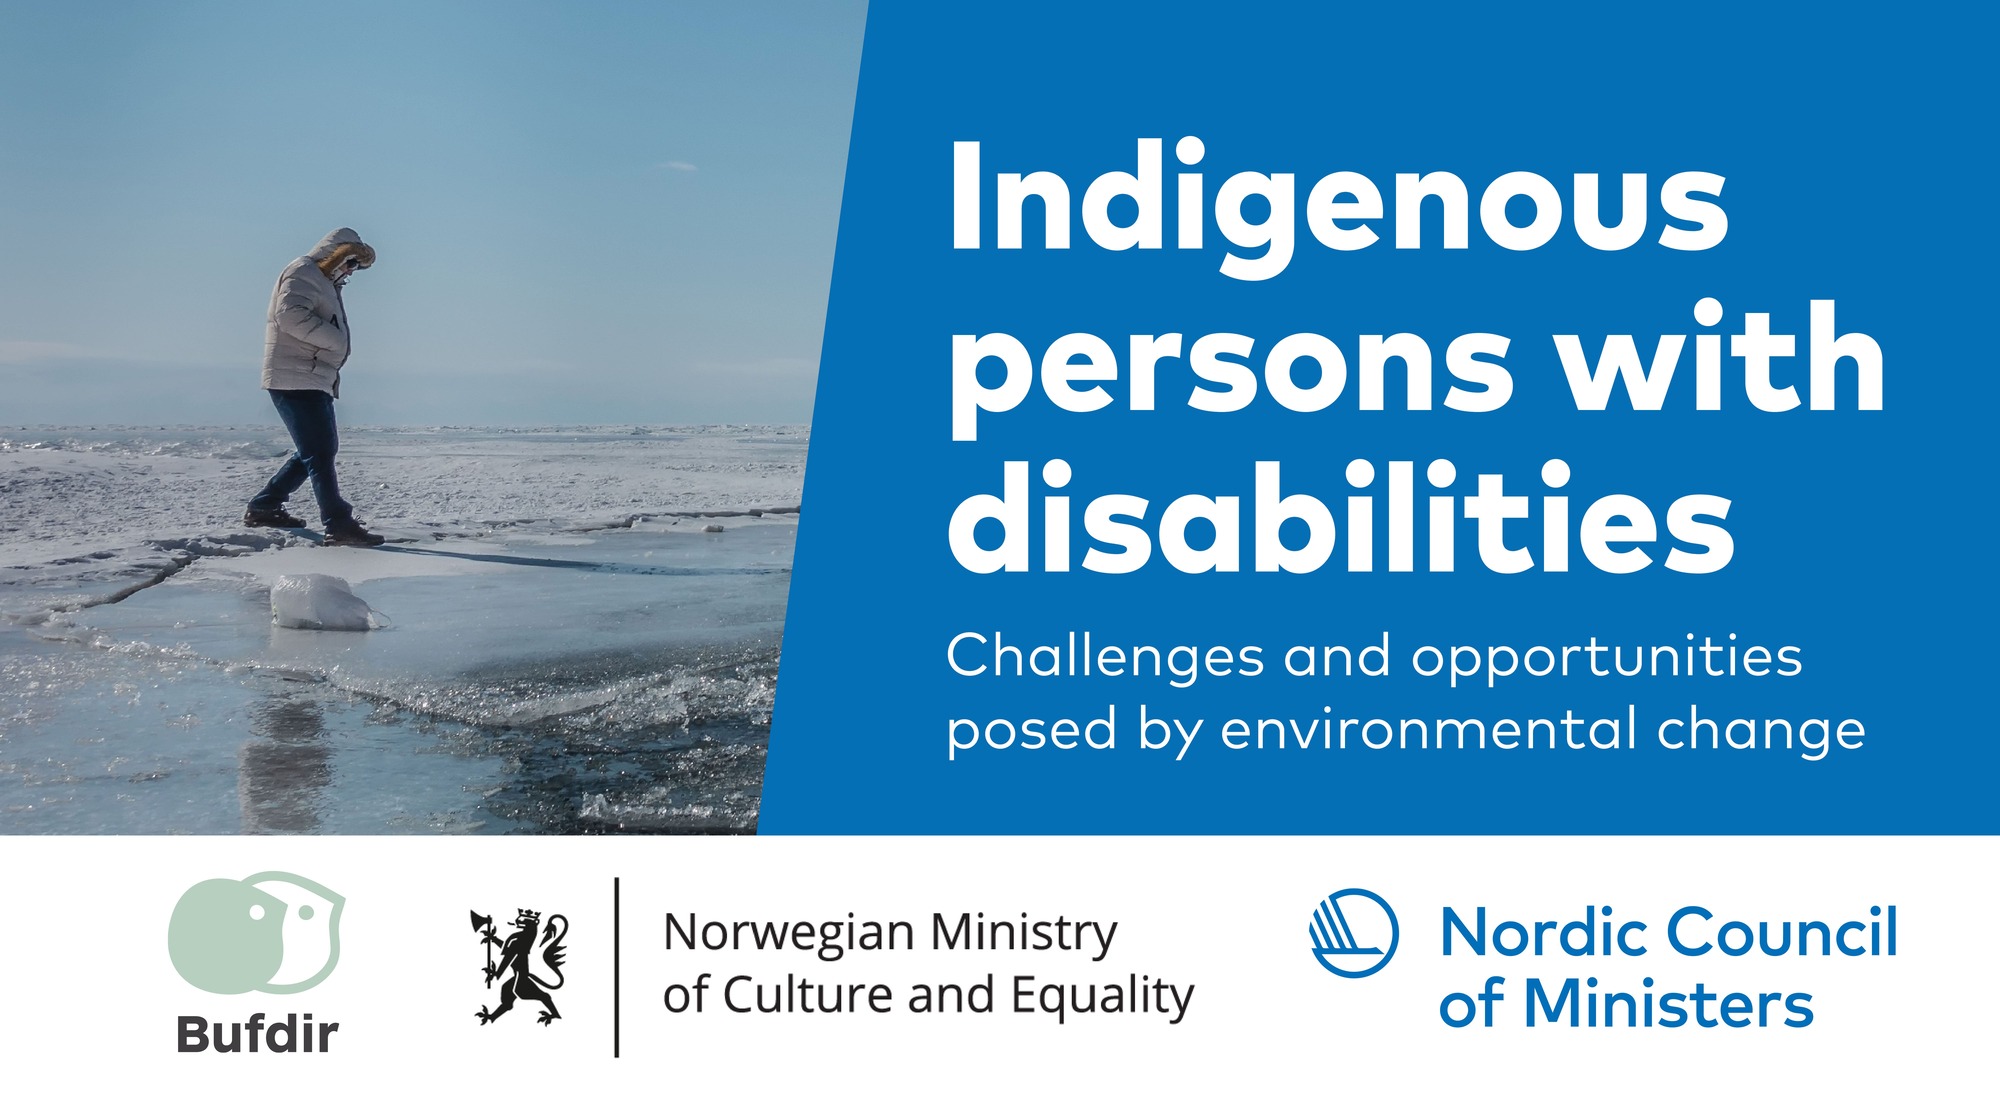 Et bilde som inneholder tekst: Indigenous people with disabilities - Challenges and opportunities posed by environmental change. 